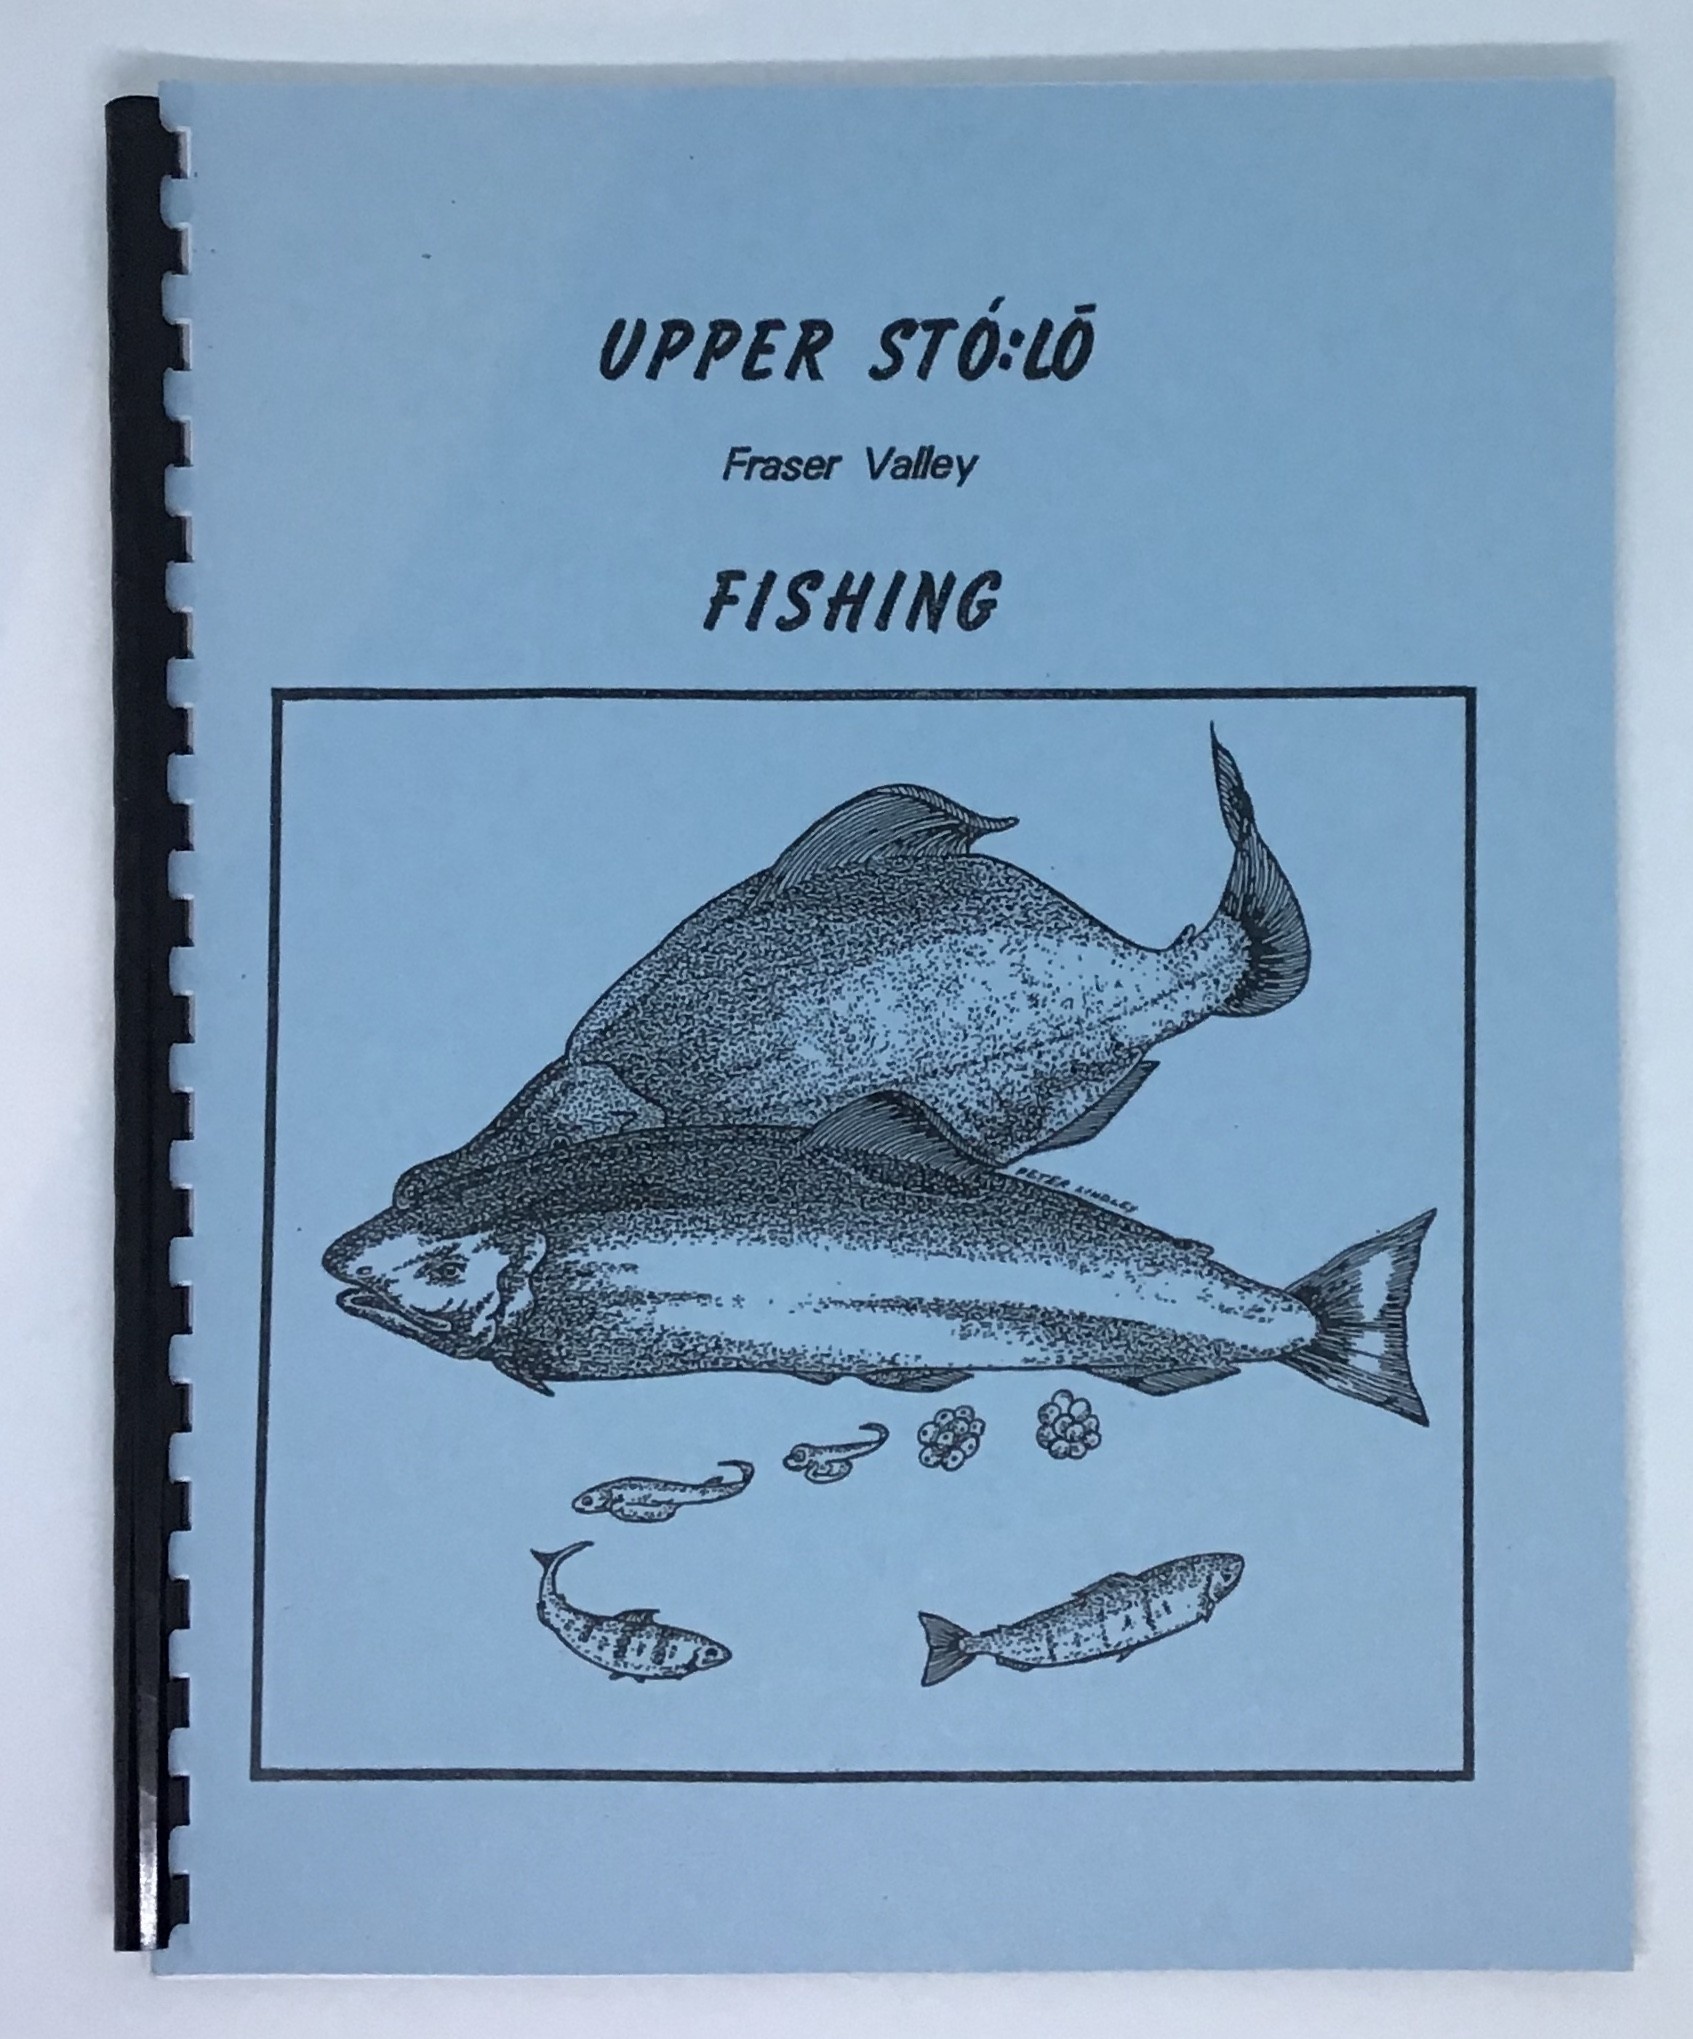 Upper Sto:lo Fraser Valley Fishing - Stó∶lō Gift Shop